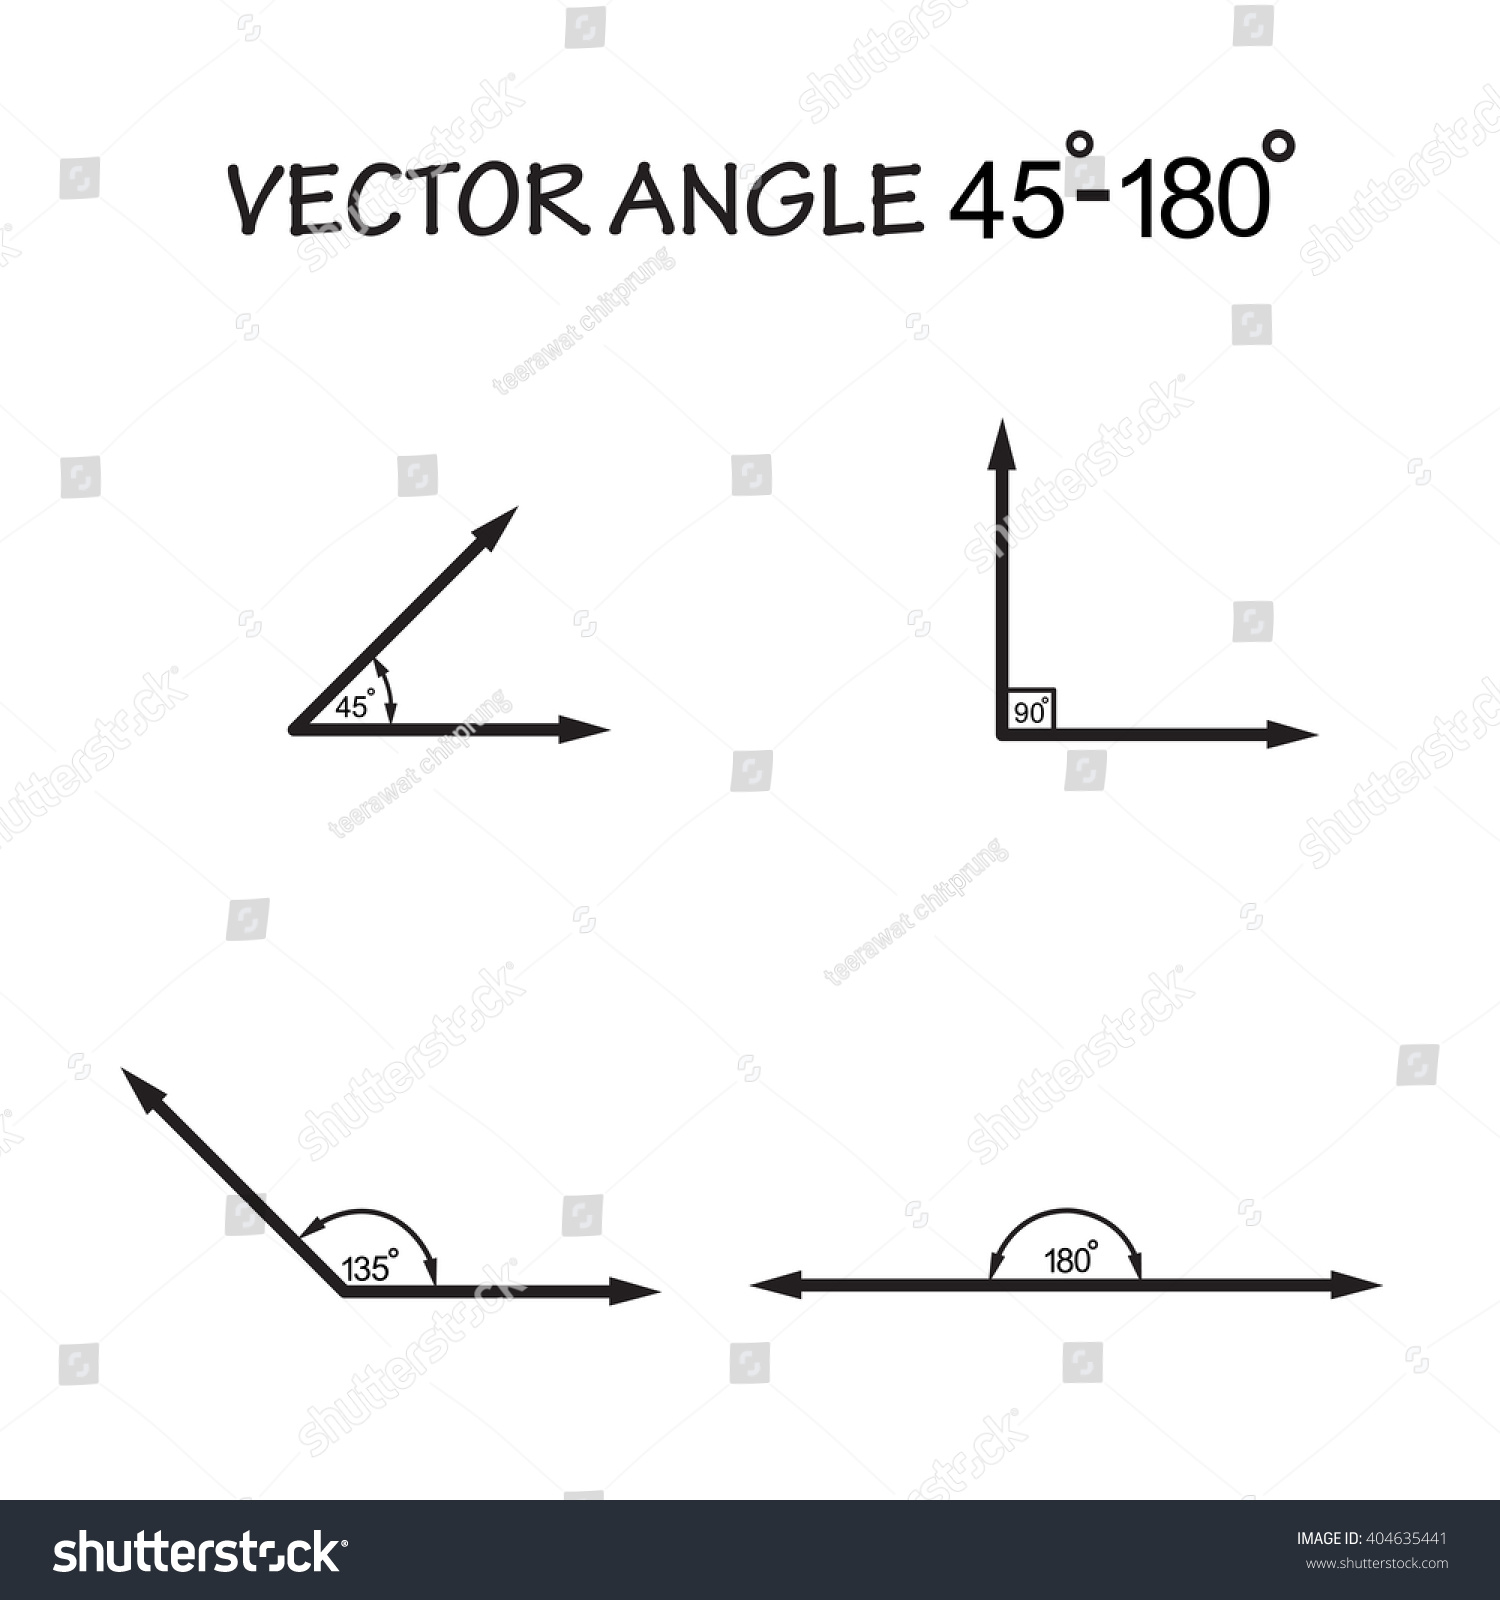 Vector Angle 45180 Degrees Geometry Math Stock Vector (Royalty Free ...